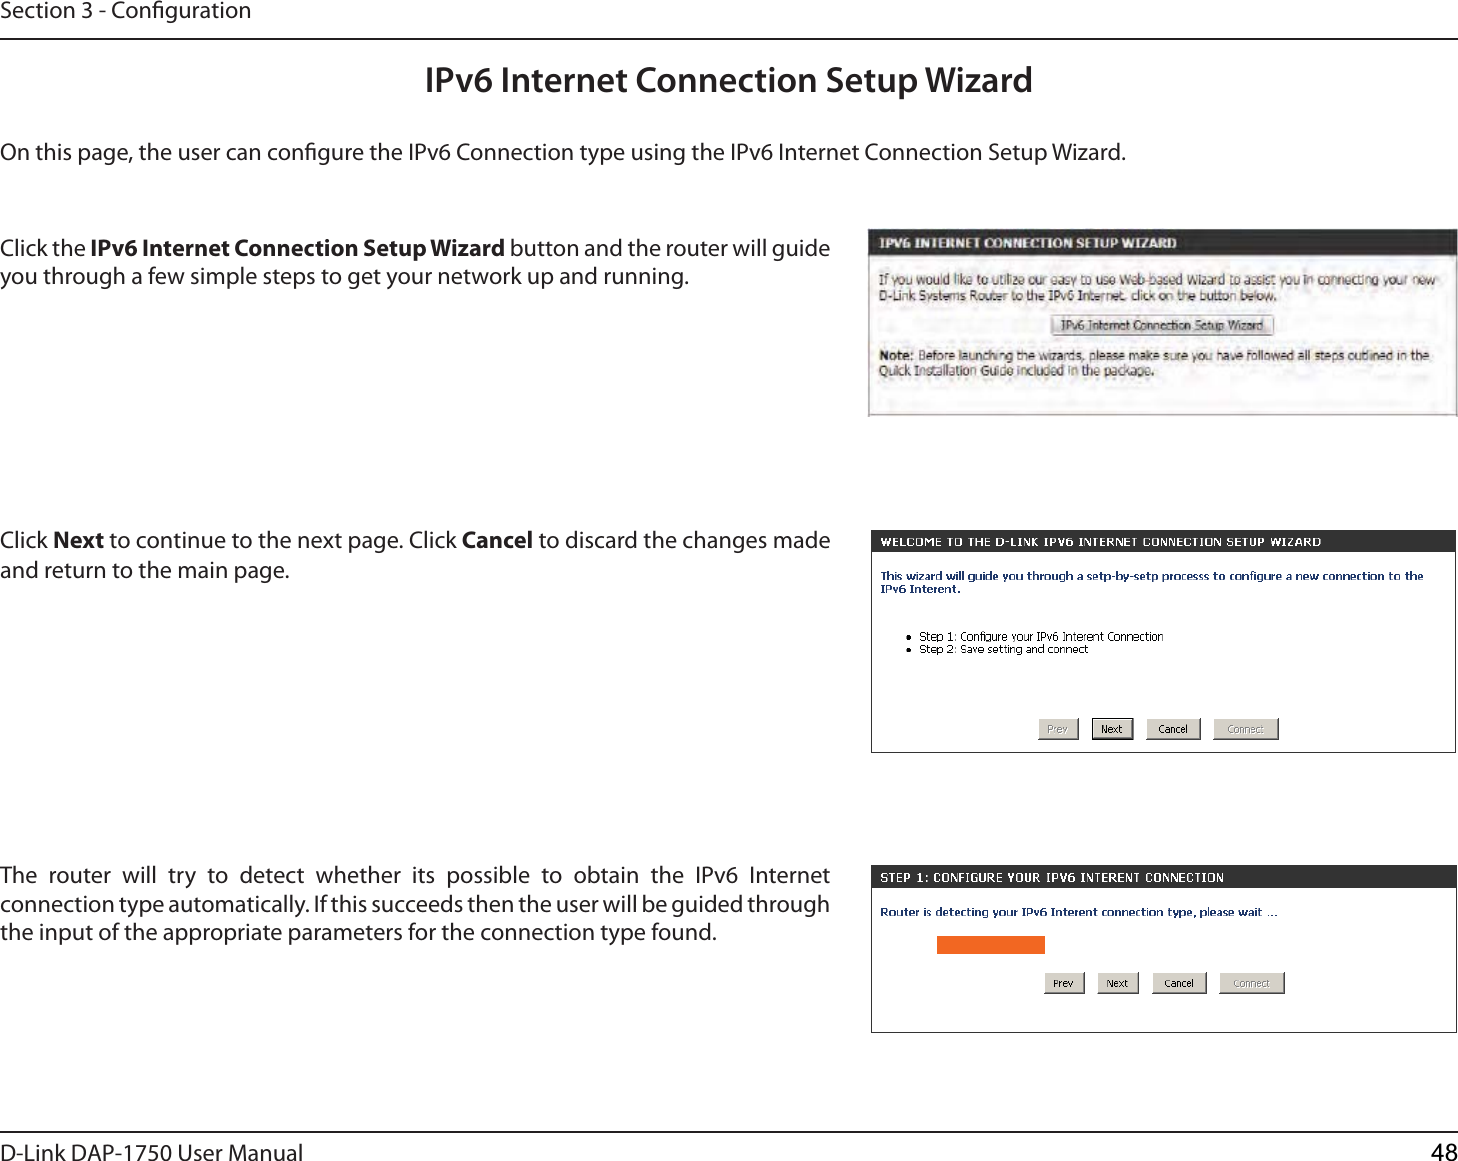 D-Link %&quot;1 User ManualSection 3 - CongurationIPv6 Internet Connection Setup WizardOn this page, the user can congure the IPv6 Connection type using the IPv6 Internet Connection Setup Wizard.Click the IPv6 Internet Connection Setup Wizard button and the router will guide you through a few simple steps to get your network up and running.Click Next to continue to the next page. Click Cancel to discard the changes made and return to the main page.The router will try to detect whether its possible to obtain the IPv6 Internet connection type automatically. If this succeeds then the user will be guided through the input of the appropriate parameters for the connection type found.48